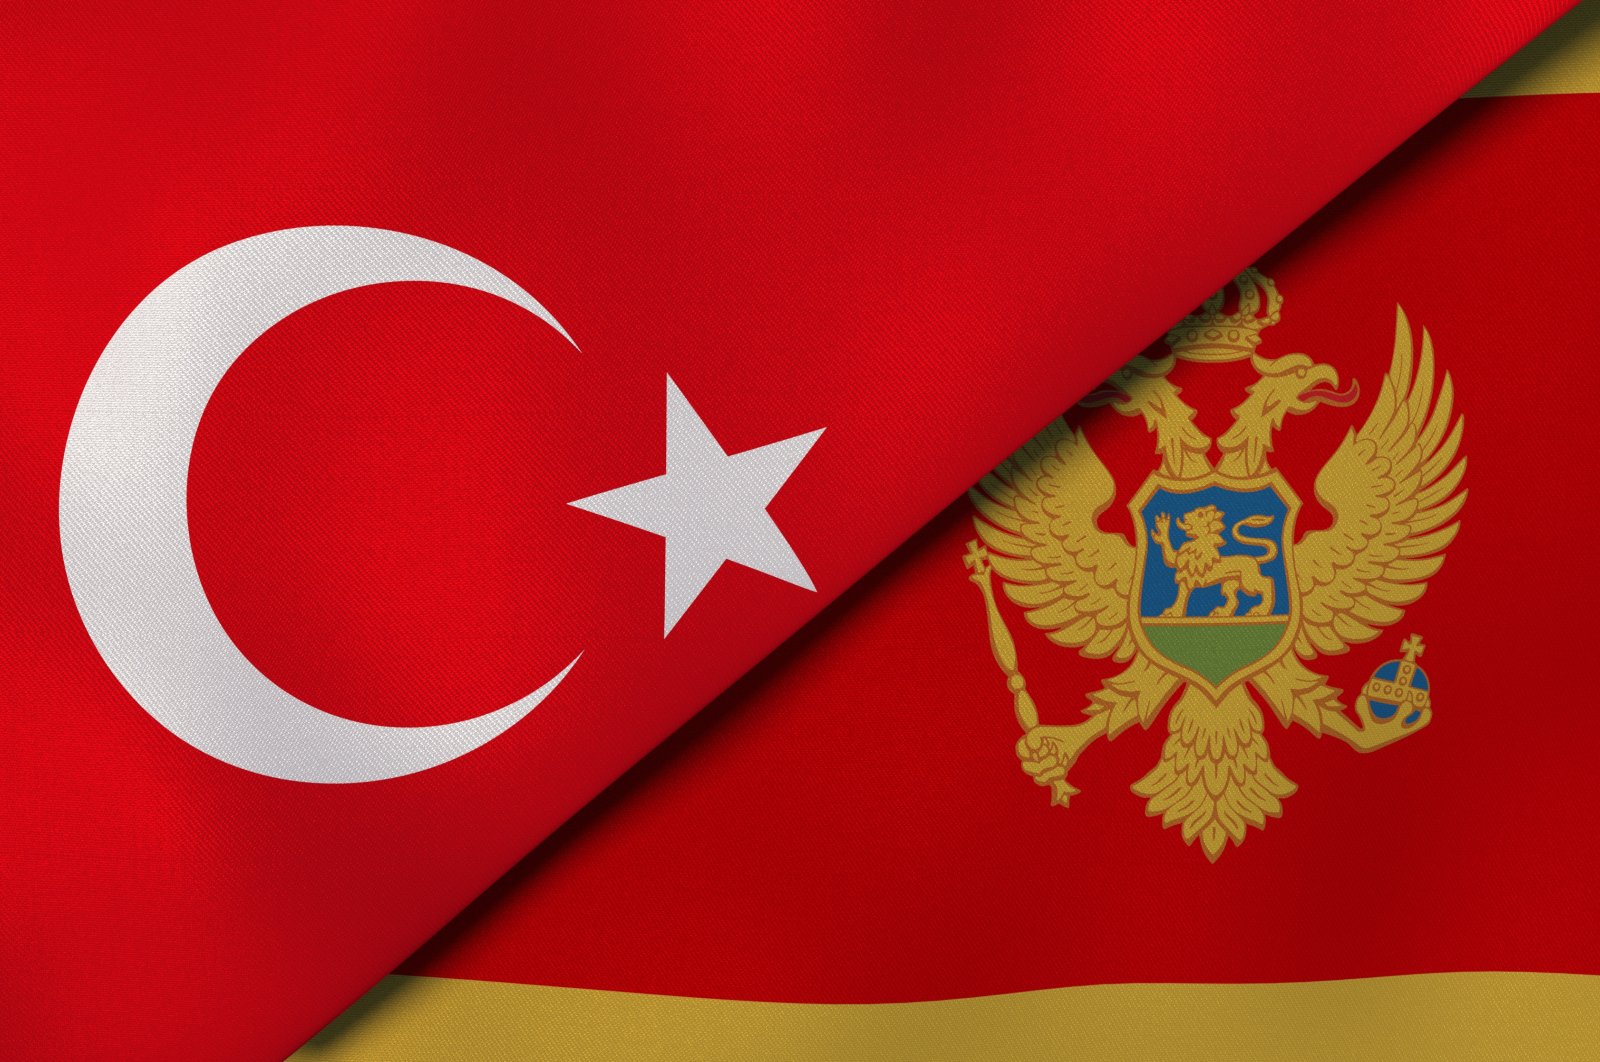 The flags of Turkey and Montenegro. (Shutterstock)